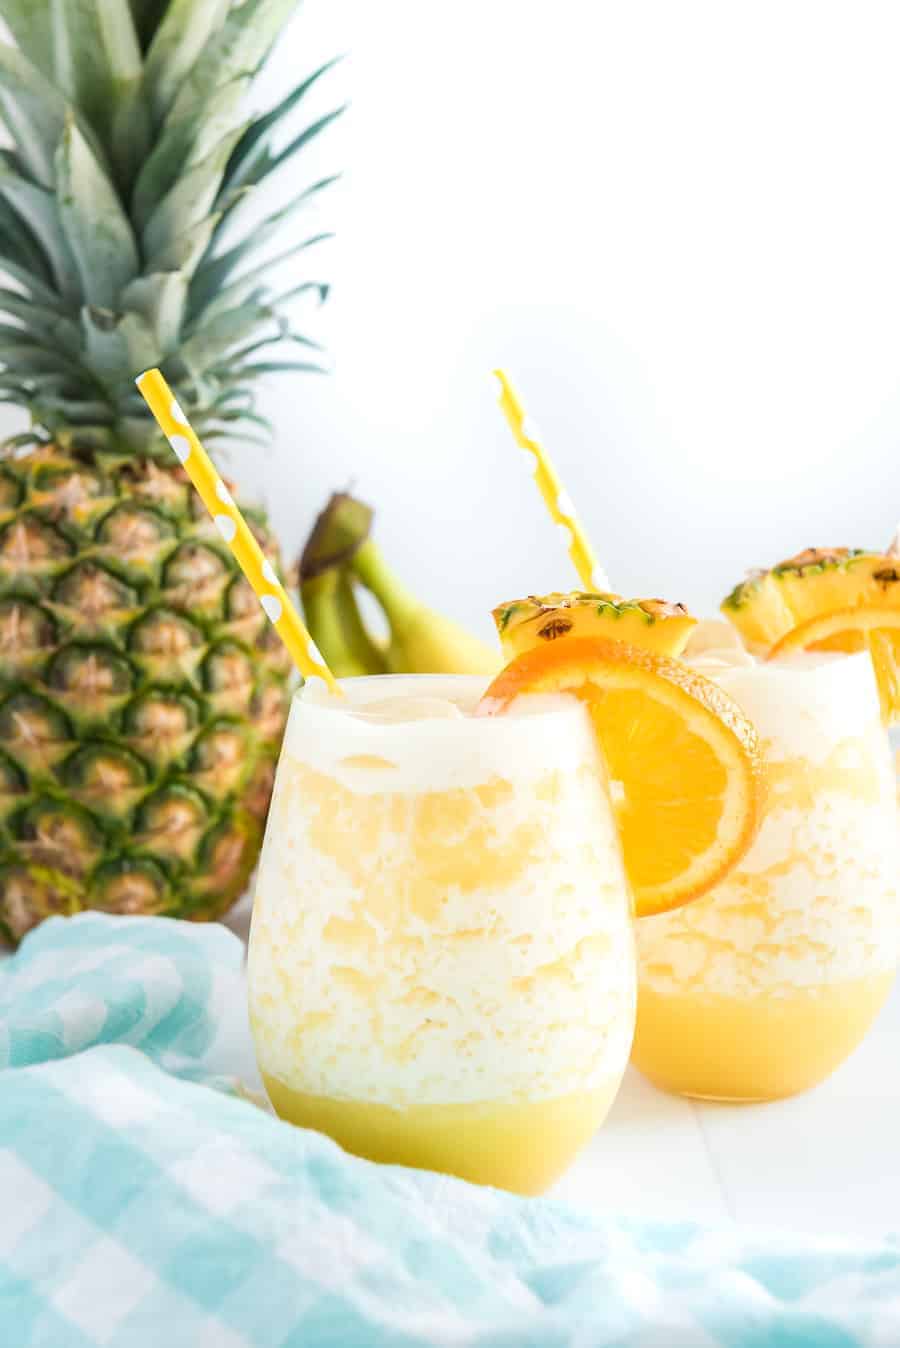 You can't go wrong with the refreshing and tropical flavors of this orange pineapple banana smoothie! #smoothie #fruitsmoothie #tropicalsmoothie #orange #pineapple #banana